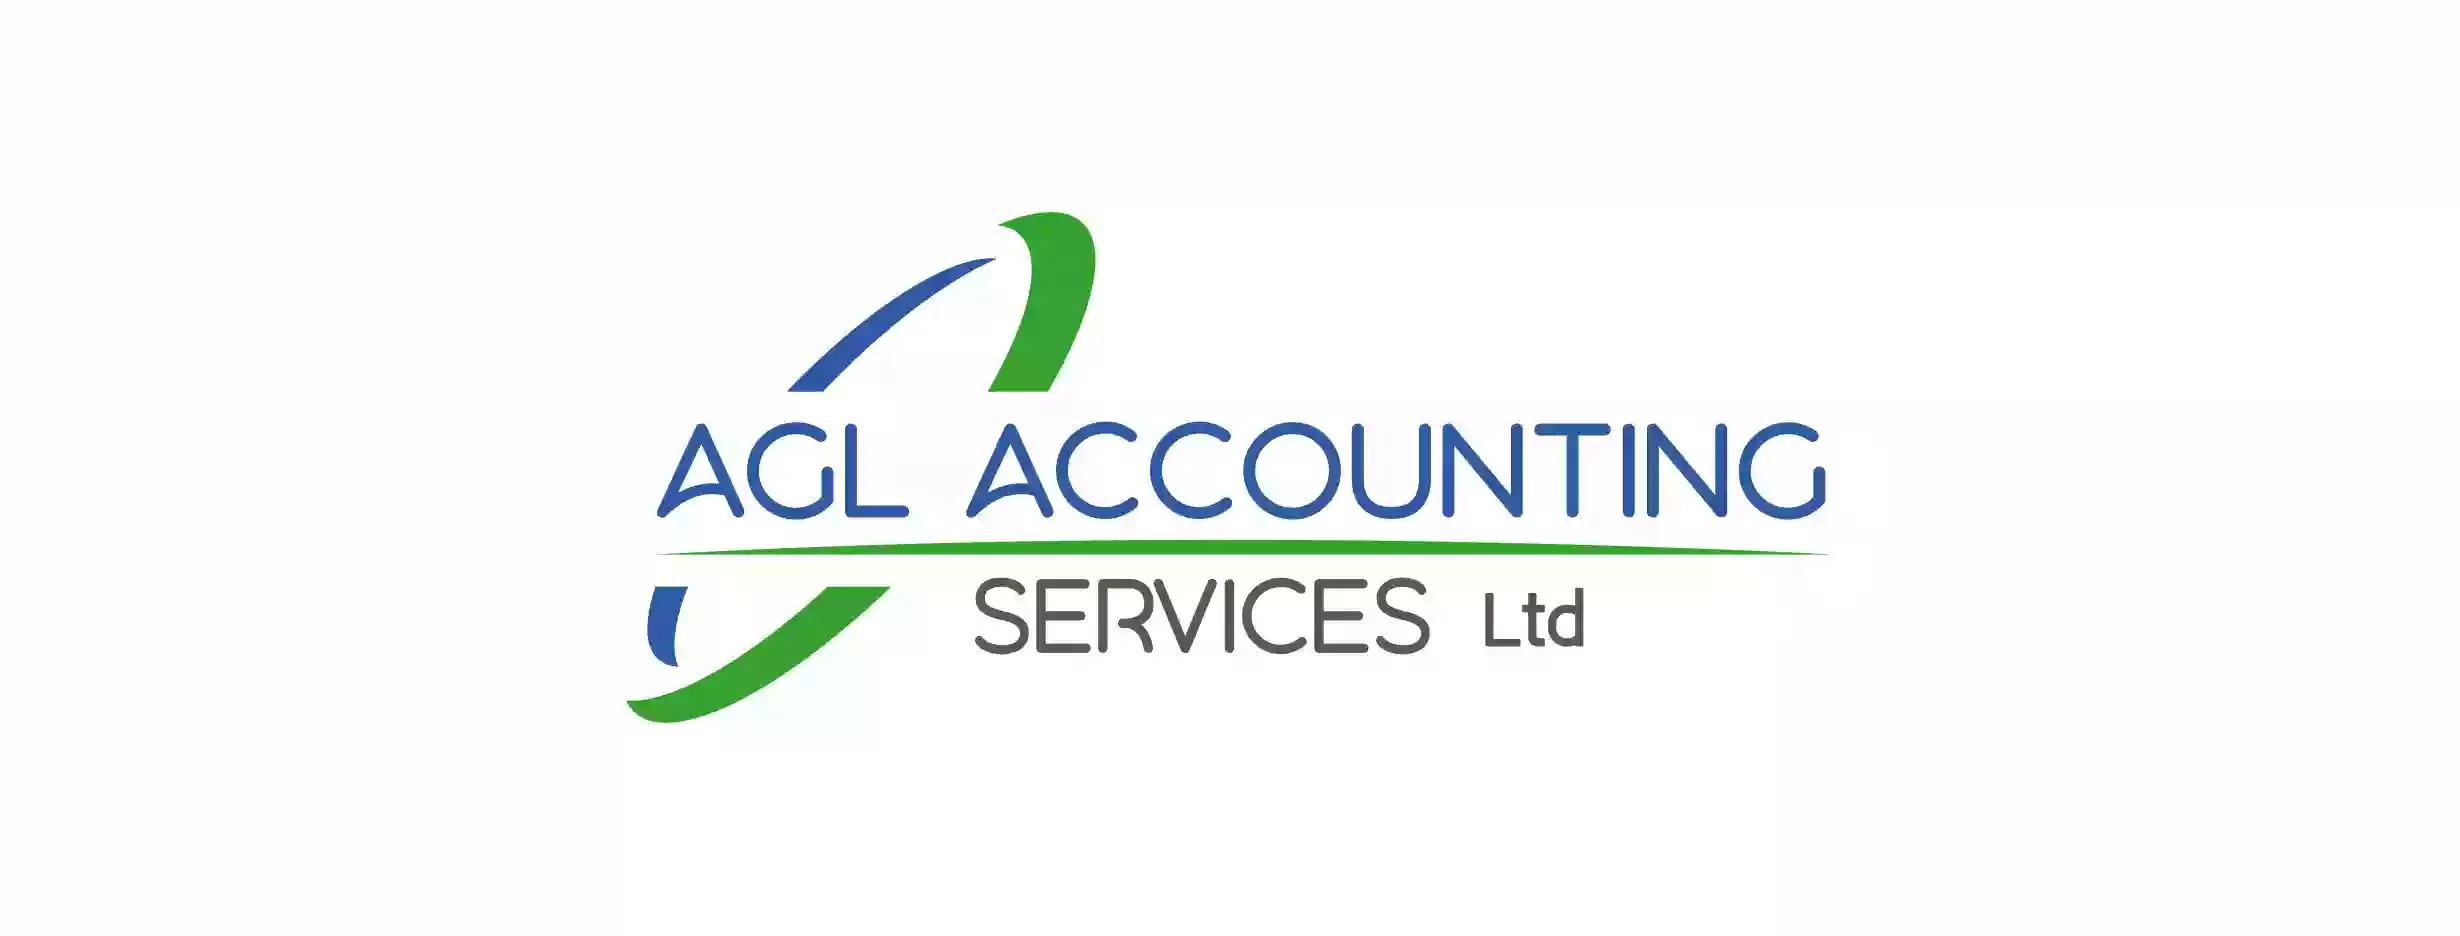 AGL Accounting Services Ltd